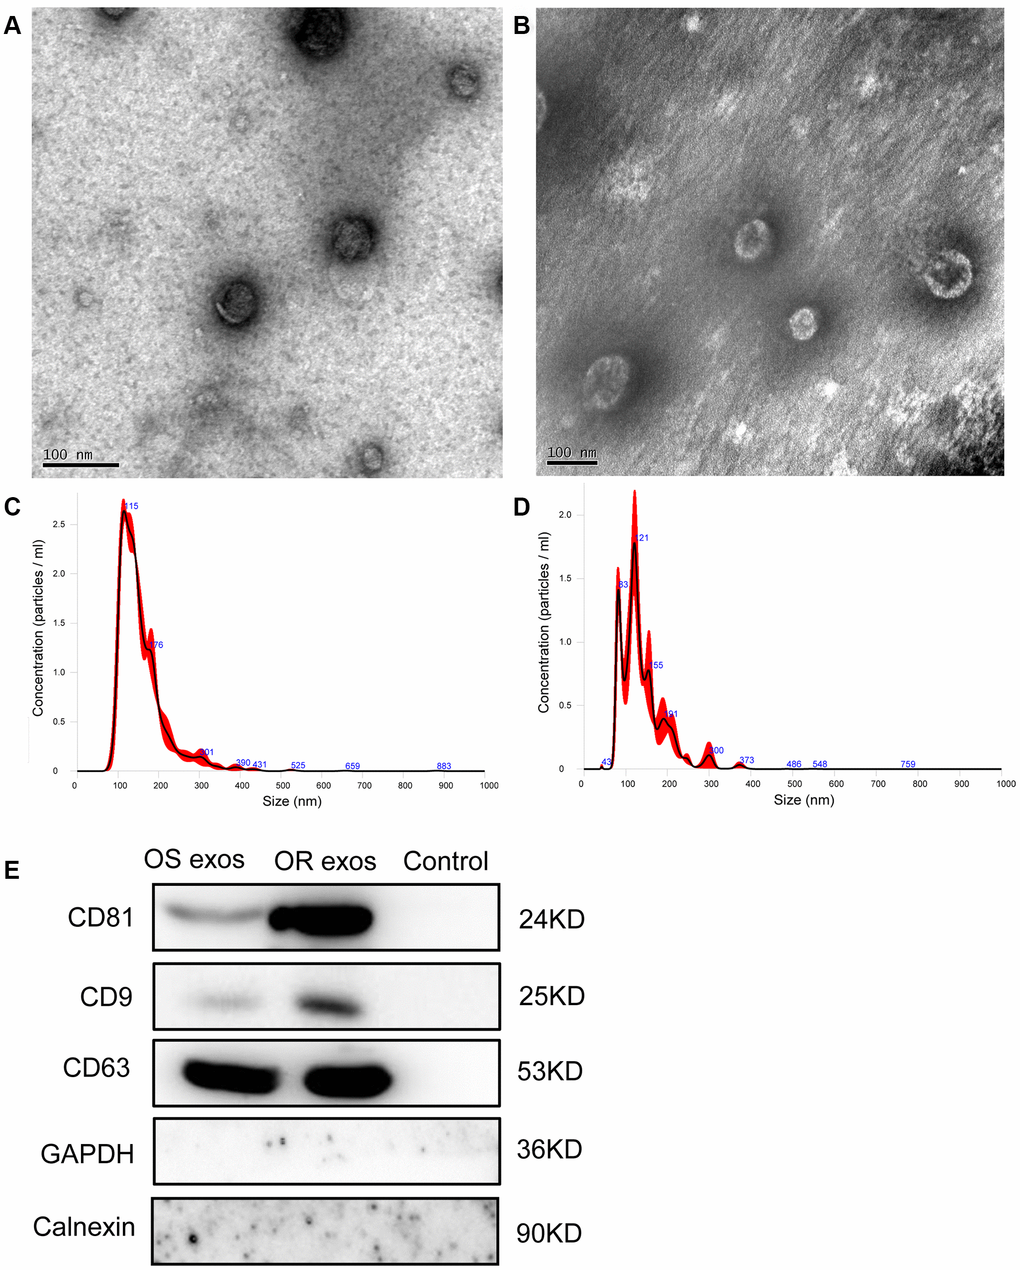 Characterization of exosomes. (A) Representative transmission electron microscopy (TEM) image of exosomes isolated from NSCLC patients before osimertinib treatment. Scale bar: 100 nm; (B) Representative TEM image of exosomes isolated from plasma of osimertinib-resistant NSCLC patients. Scale bar: 100 nm; (C) Nanoparticle tracking analysis of the size of exosomes isolated from NSCLC patients before osimertinib treatment; (D) Nanoparticle tracking analysis of the size of exosomes isolated from plasma of osimertinib-resistant NSCLC patients. (E) Western blot analysis of exosomal marker CD9, CD63 and CD81. Calnexin, which is an integral protein of the endoplasmic reticulum, and GAPDH were used as negative control for identification of exosomes. Supernatant was used as control samples. OS exos: Osimertinib-sensitive exosomes; OR exos: Osimertinib-resistant exosomes.